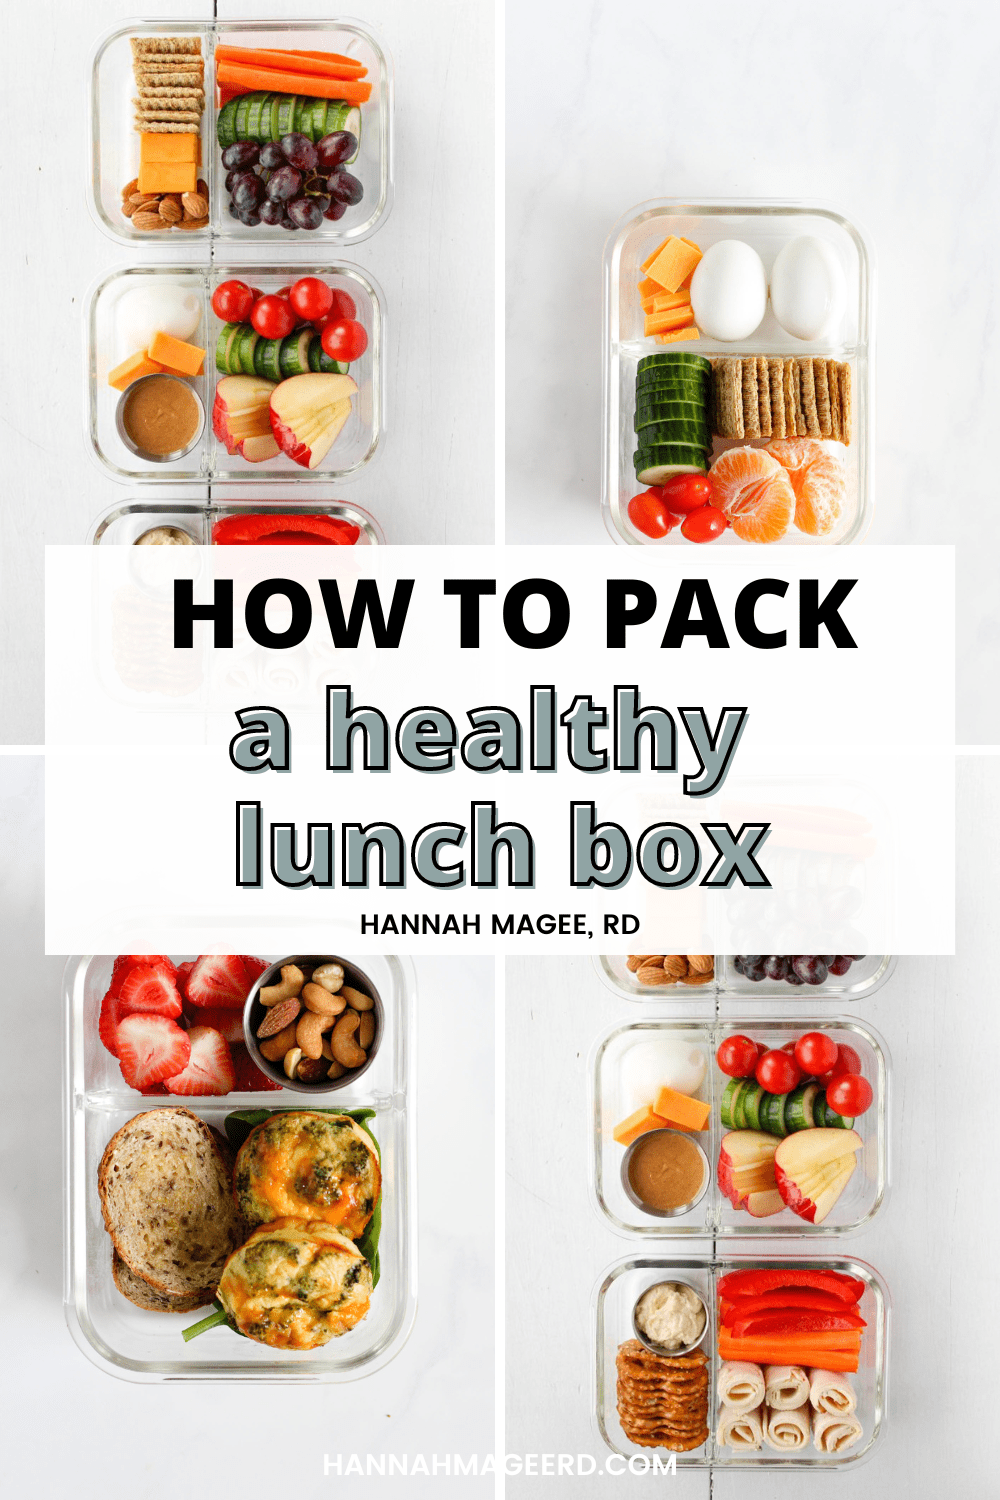 Lunch Box Ideas and Guide - Hälsa Nutrition